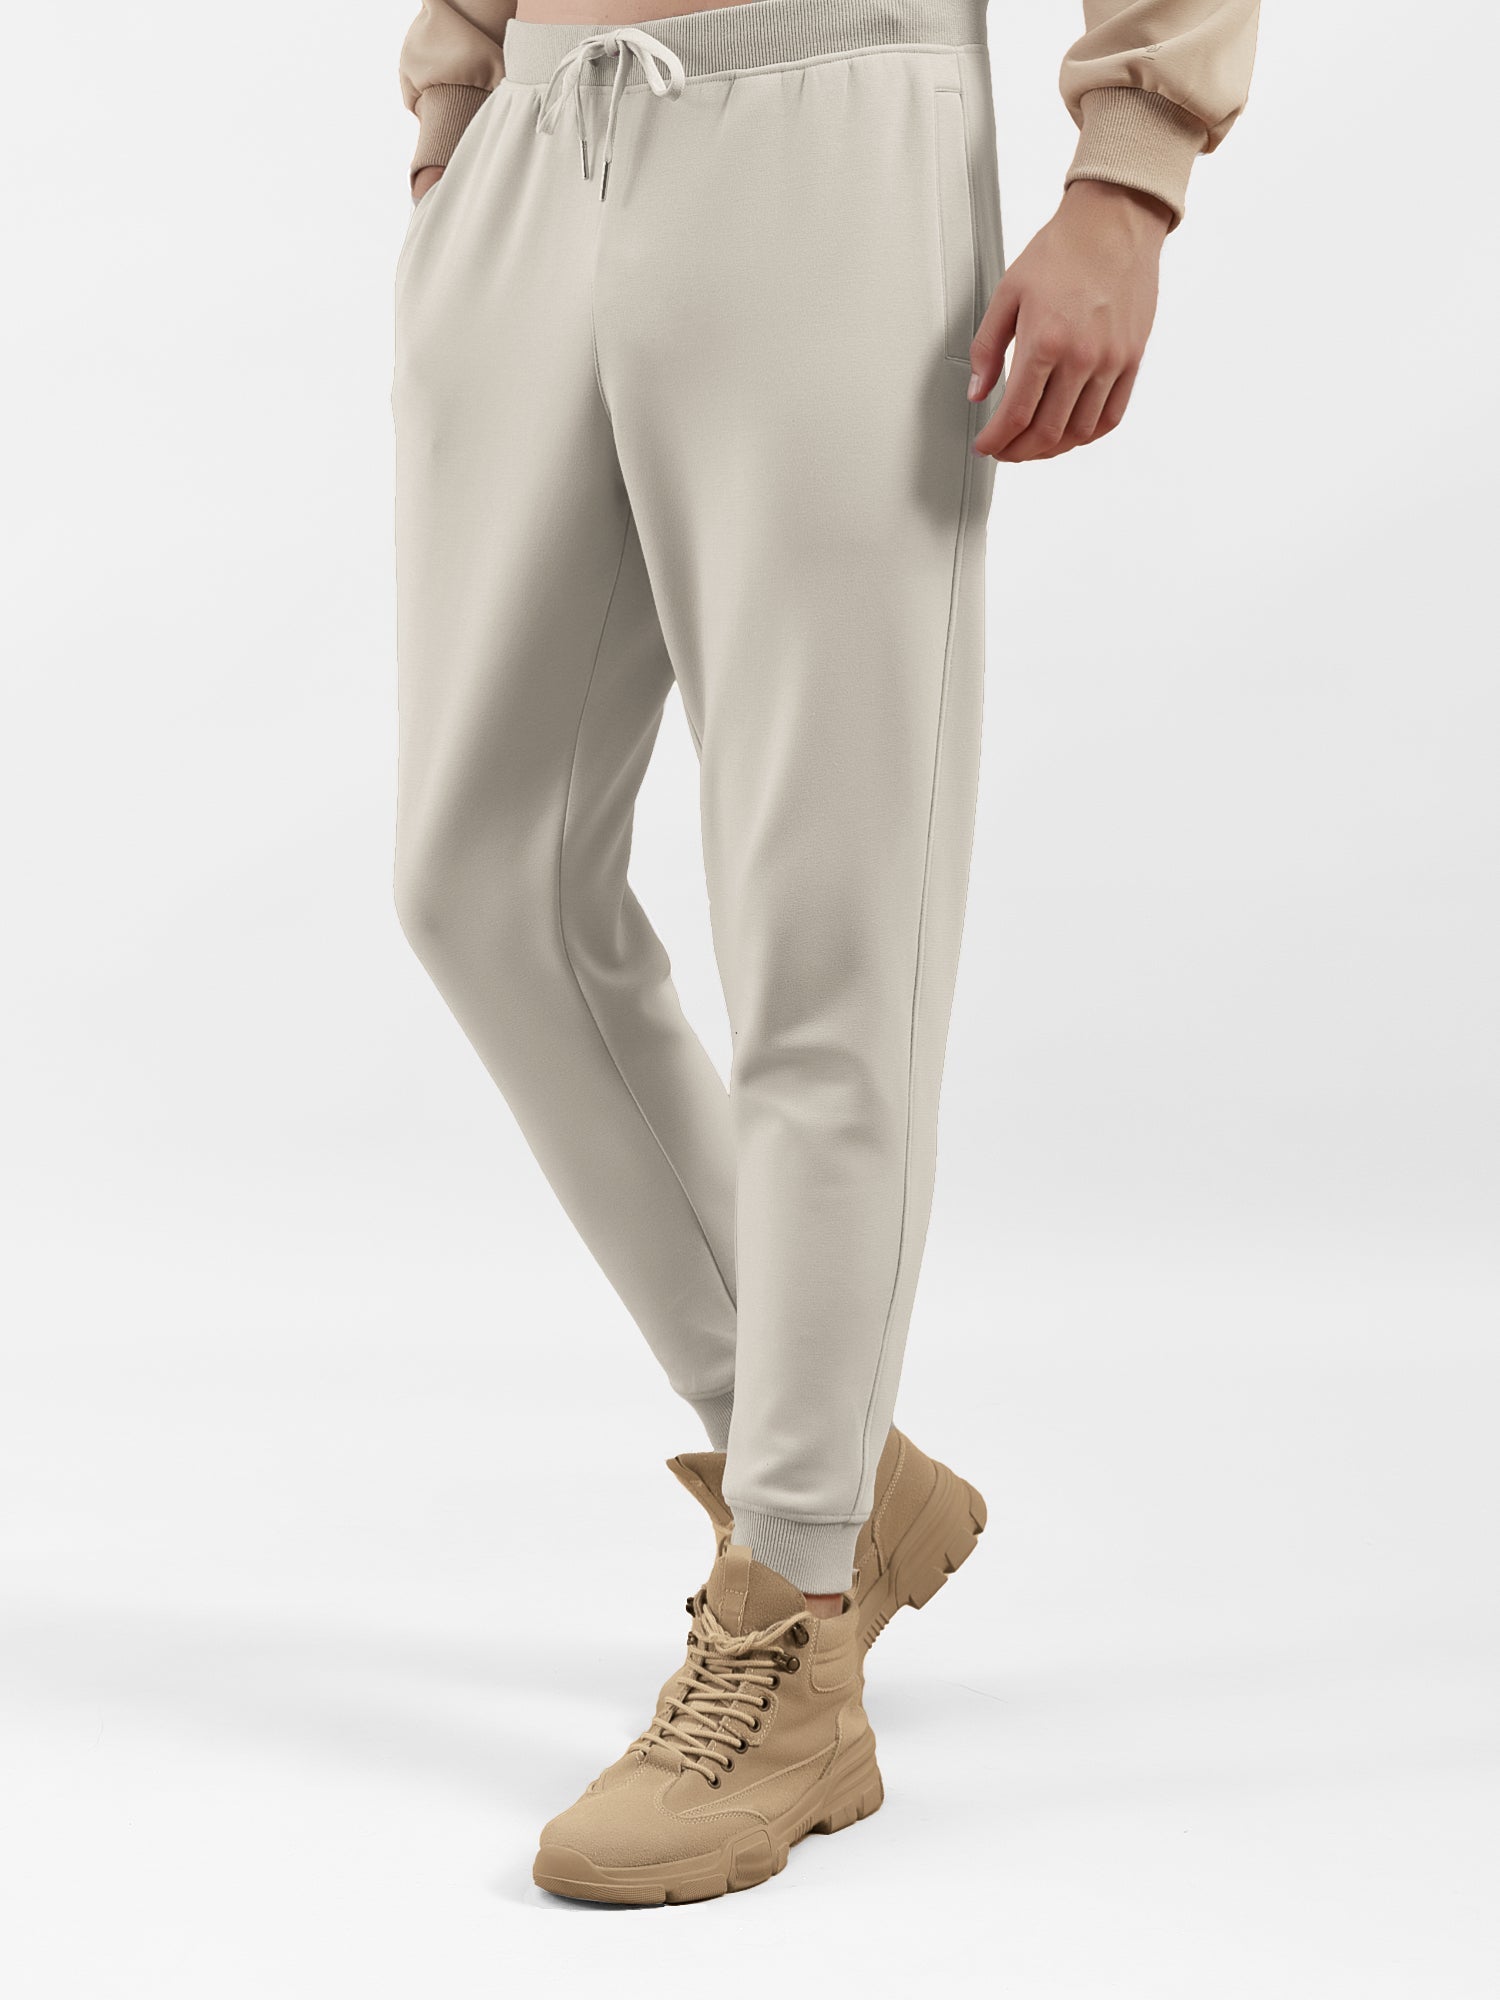 CLEAN FIT Joggers, Now with Back Zipper Pockets